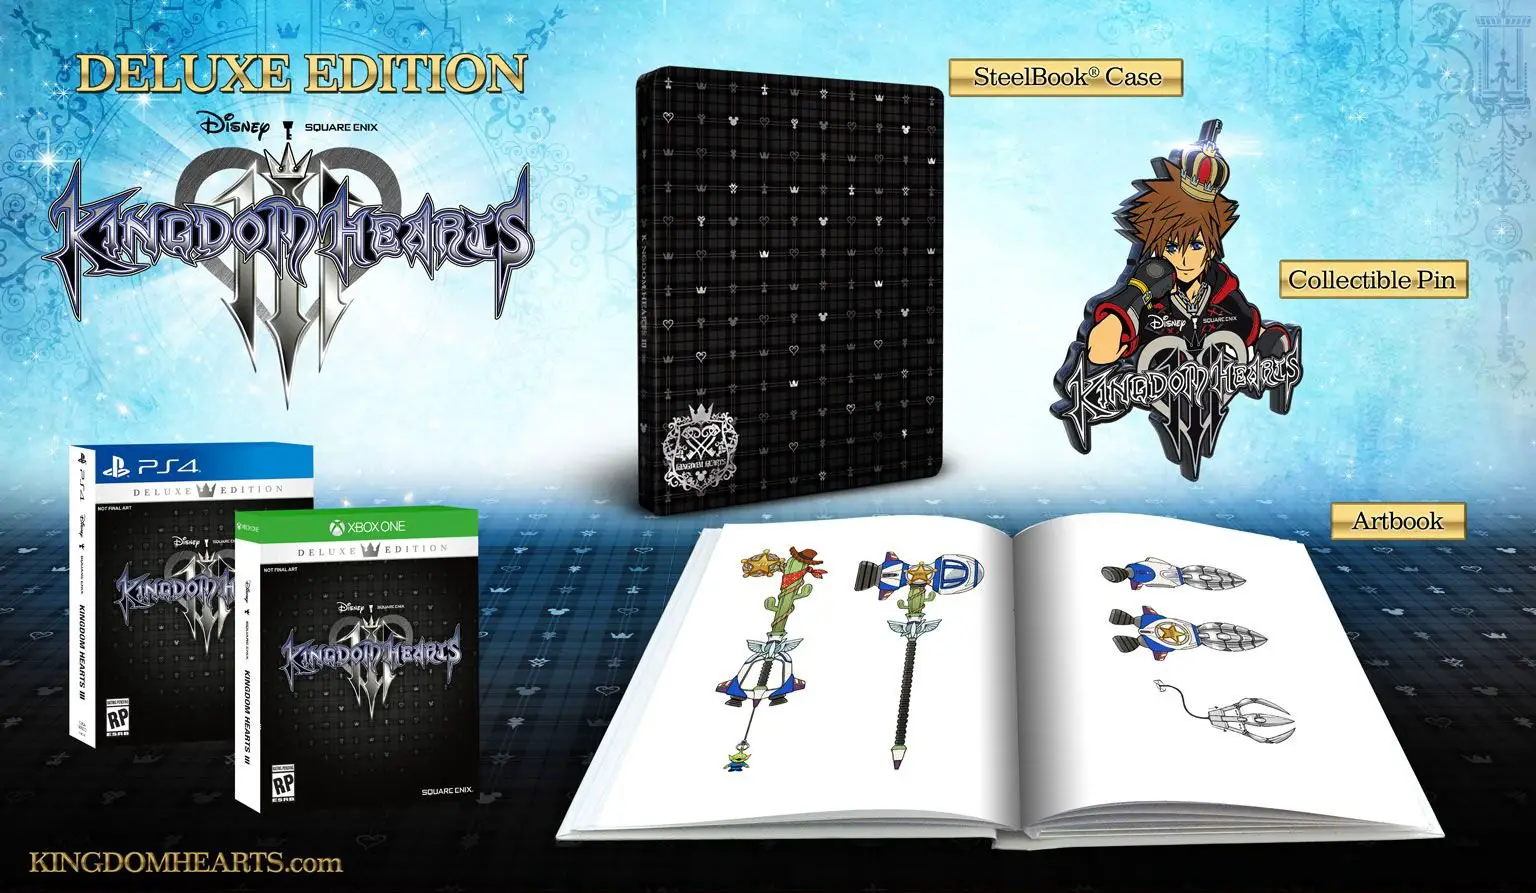 whats the different between the kingdom hearts 3 and kingdom hearts 3 deluxe editions